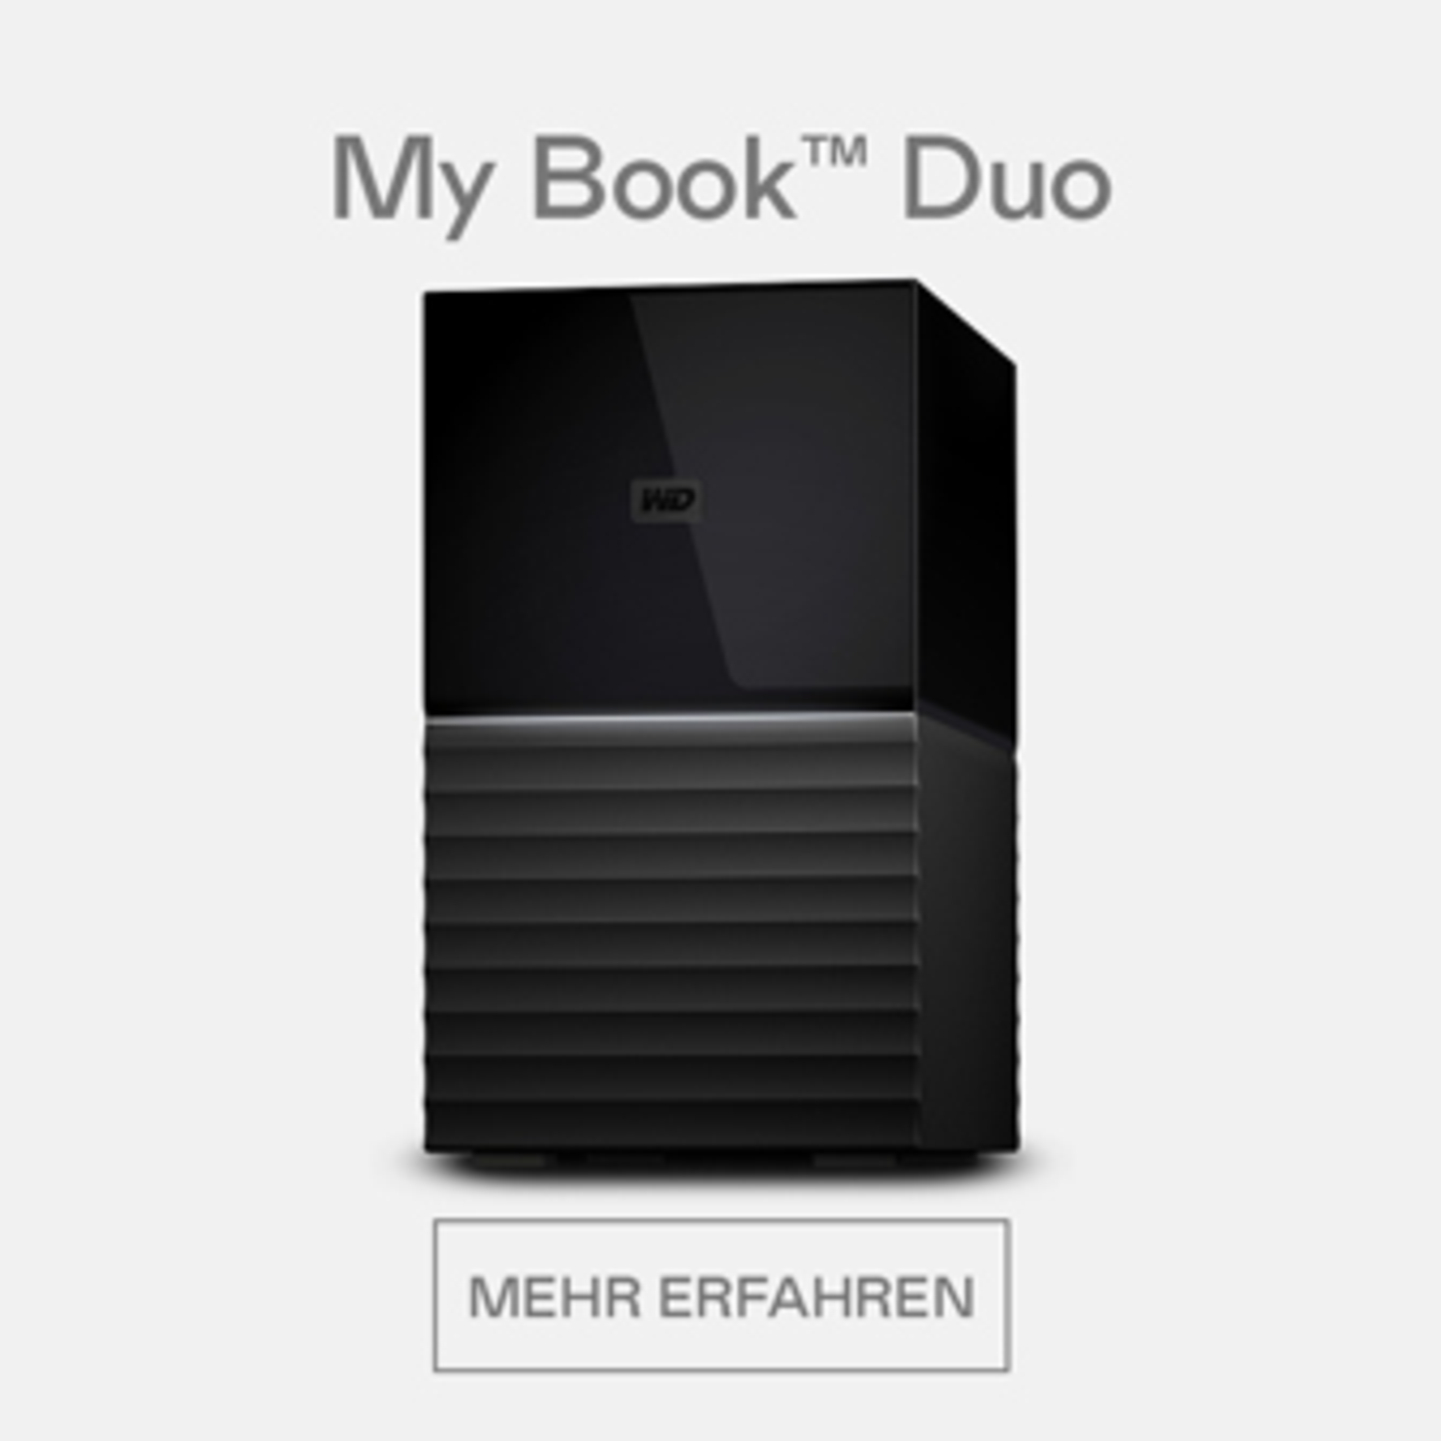 My Book Duo